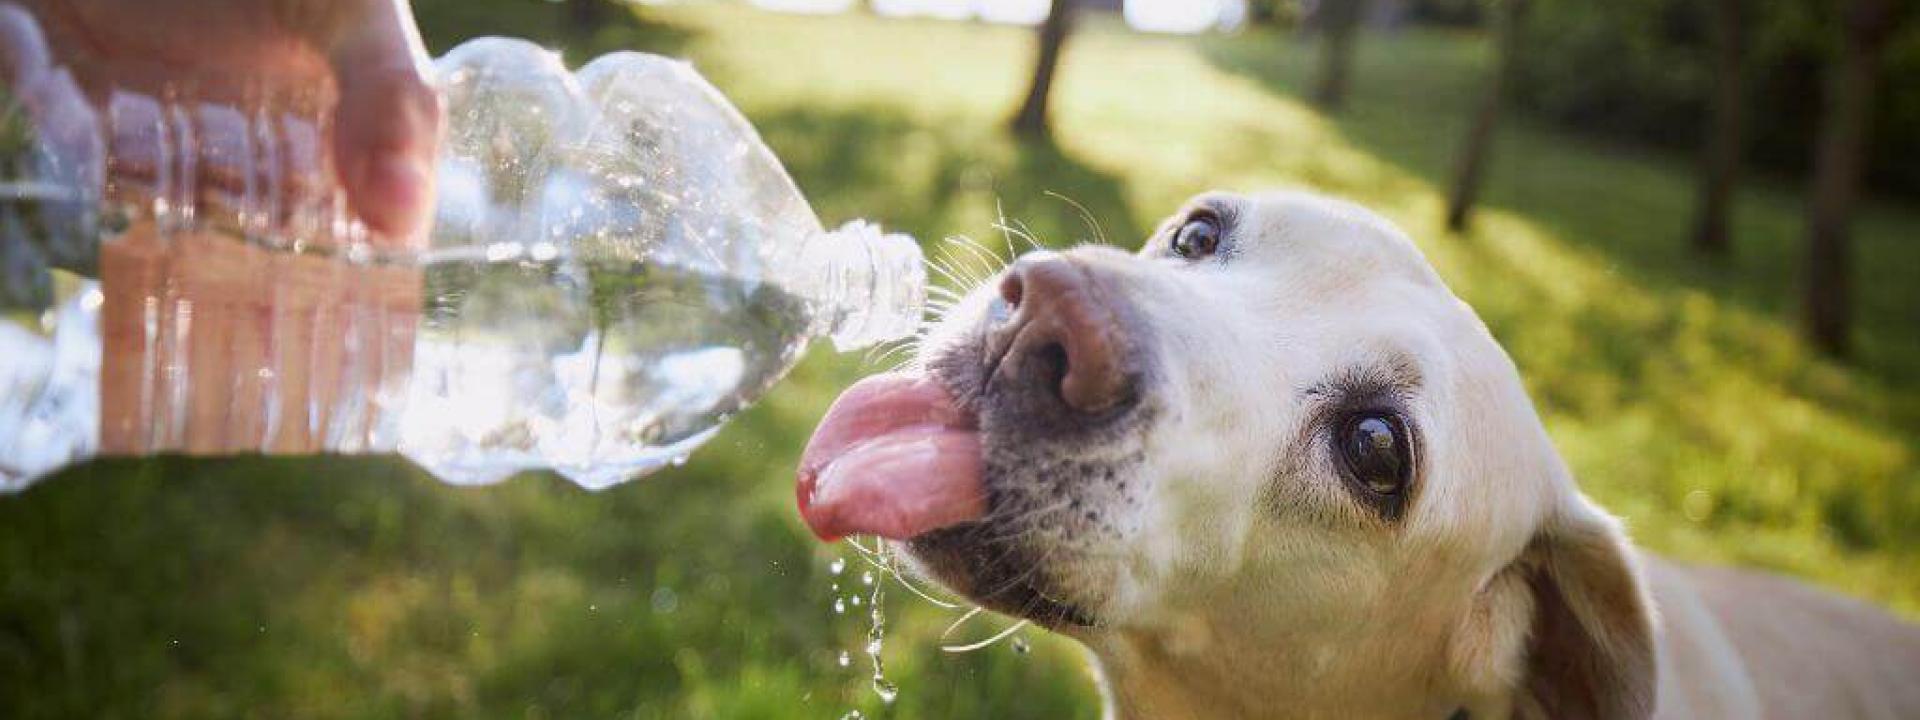 safety tips for pets in extreme heat